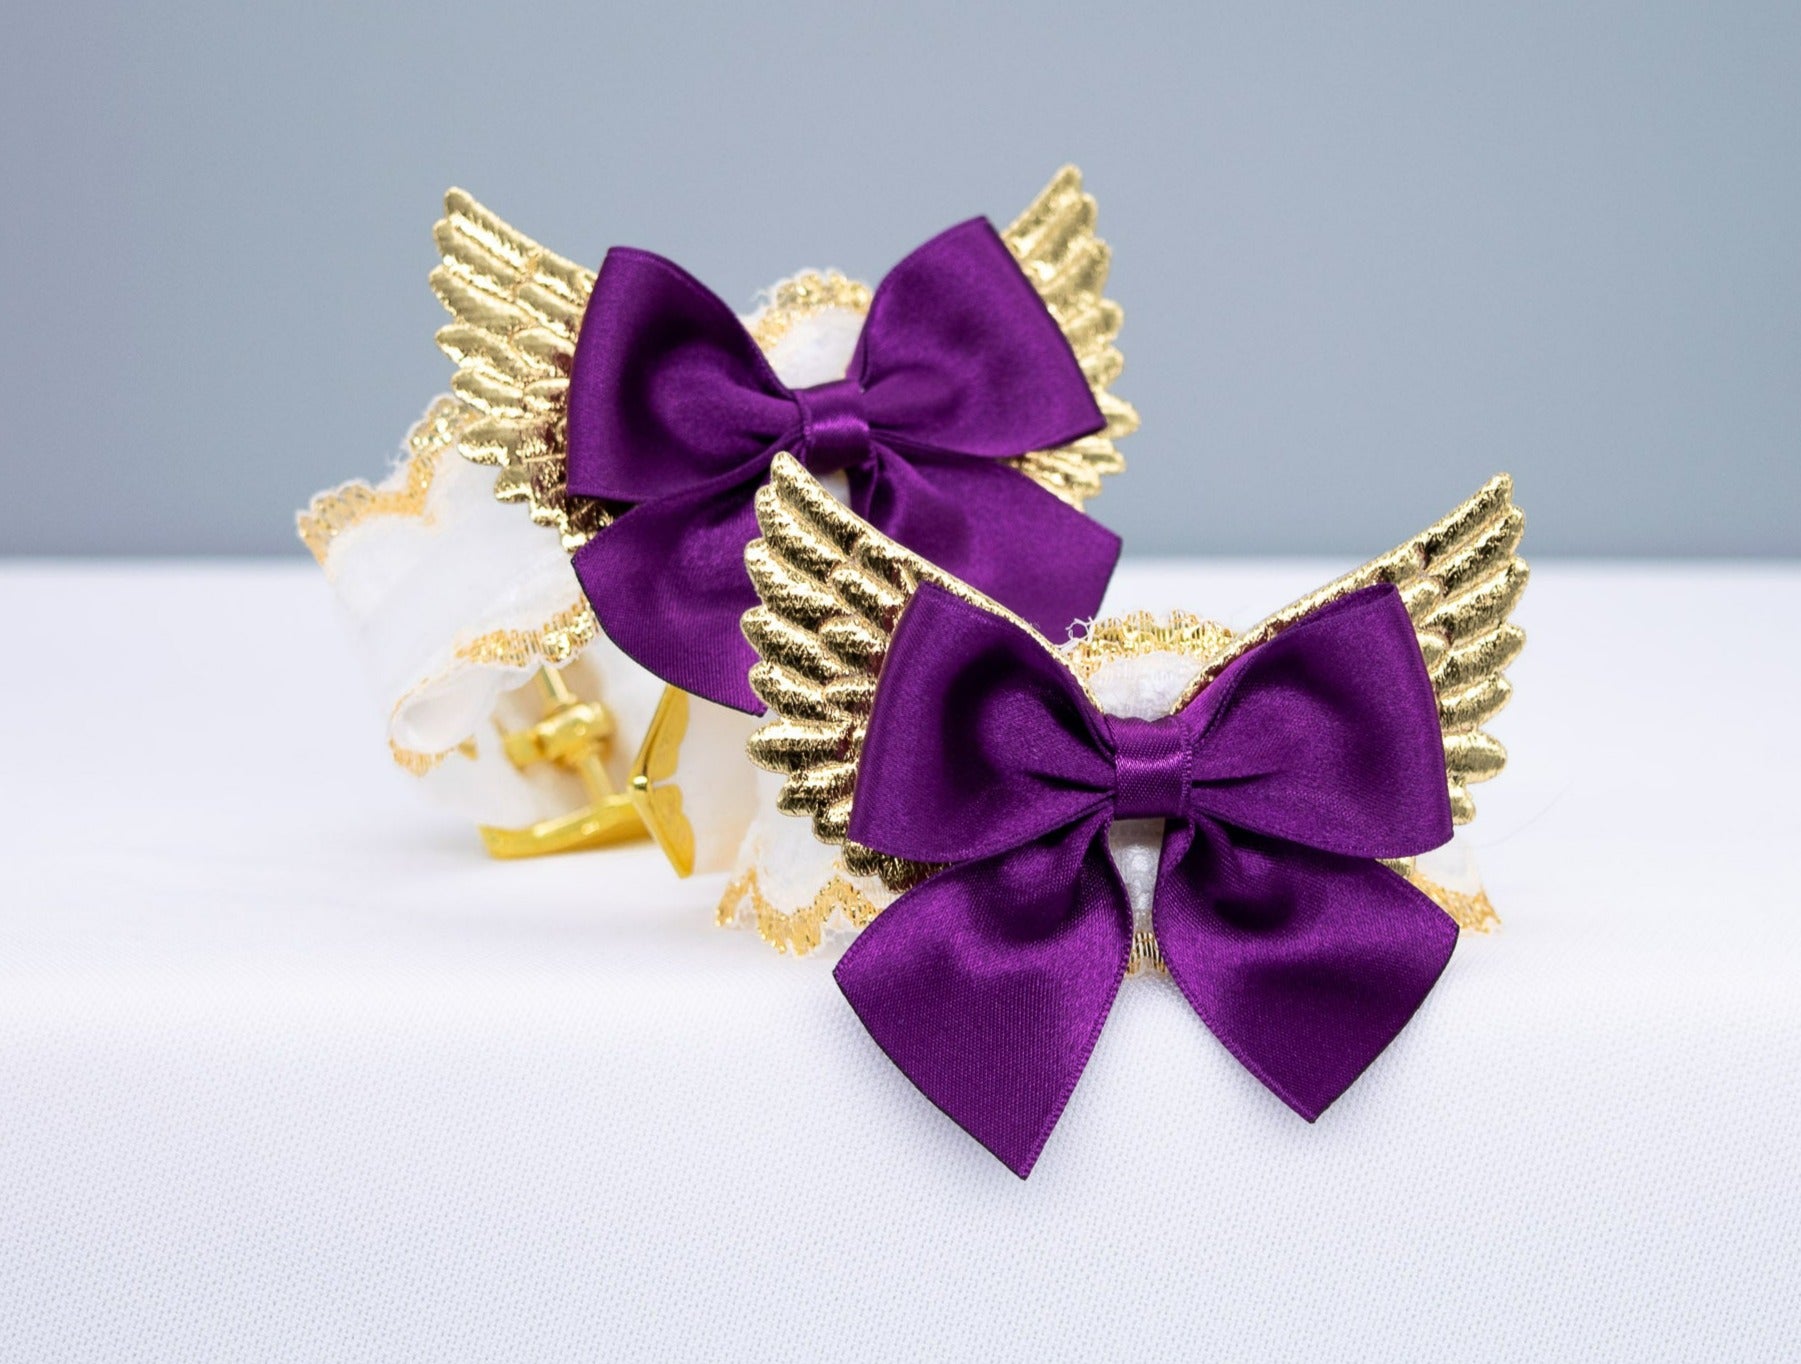 White Lace Plum Bows Winged BDSM Cuffs in Gold